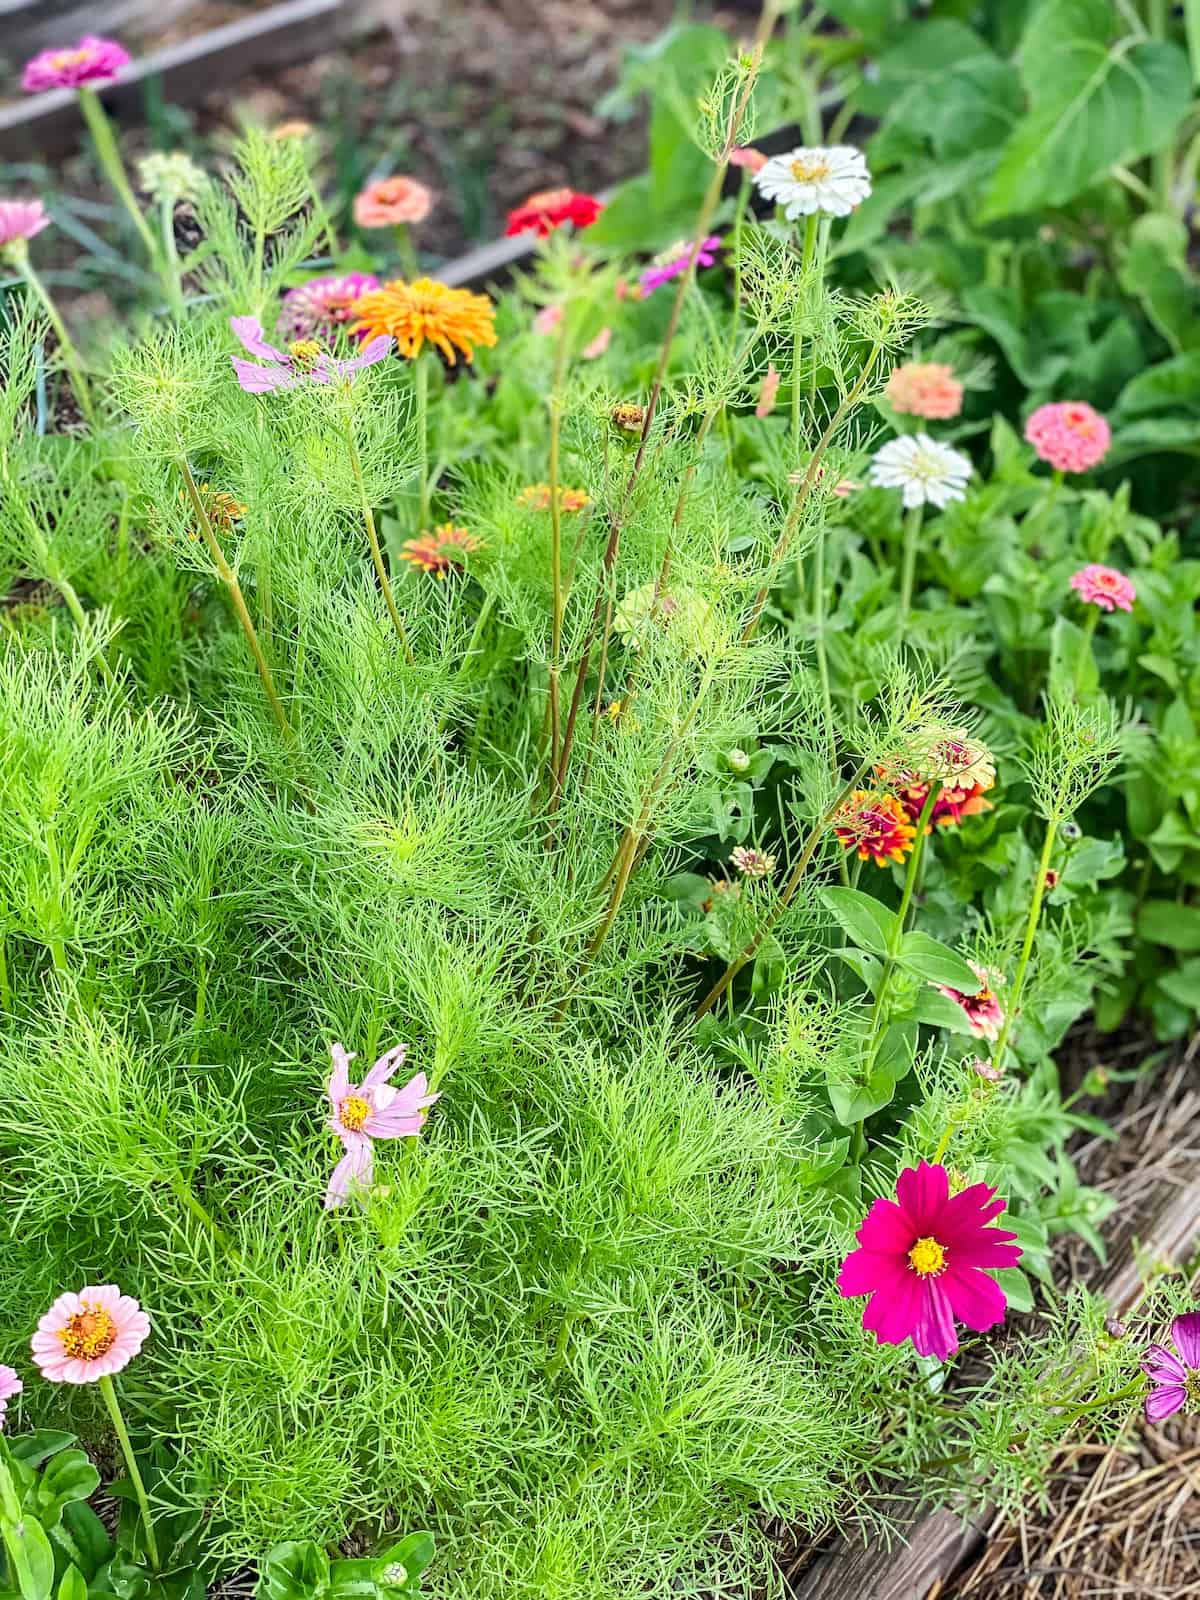 cosmos and zinnias in the cut flower garden bed.